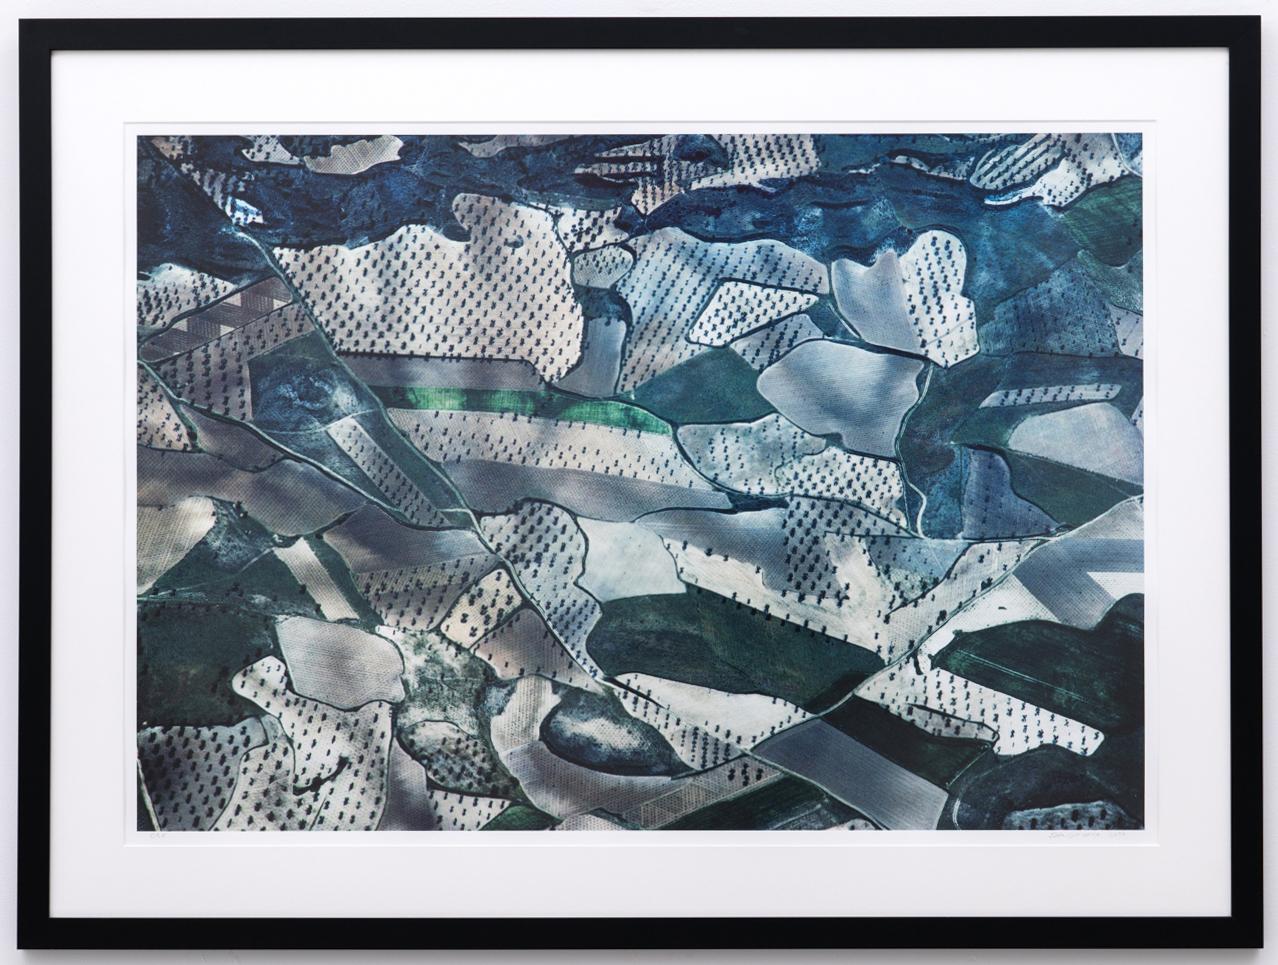 Contemporary aerial landscape photograph of blue, gray, green and teal farm fields captured from the photographer's plane over La Mancha, Spain
Archival digital print, edition 5 of 25
Image size: 26 x 39 inches
Framed size: 36 x 48 x 1 inches, black